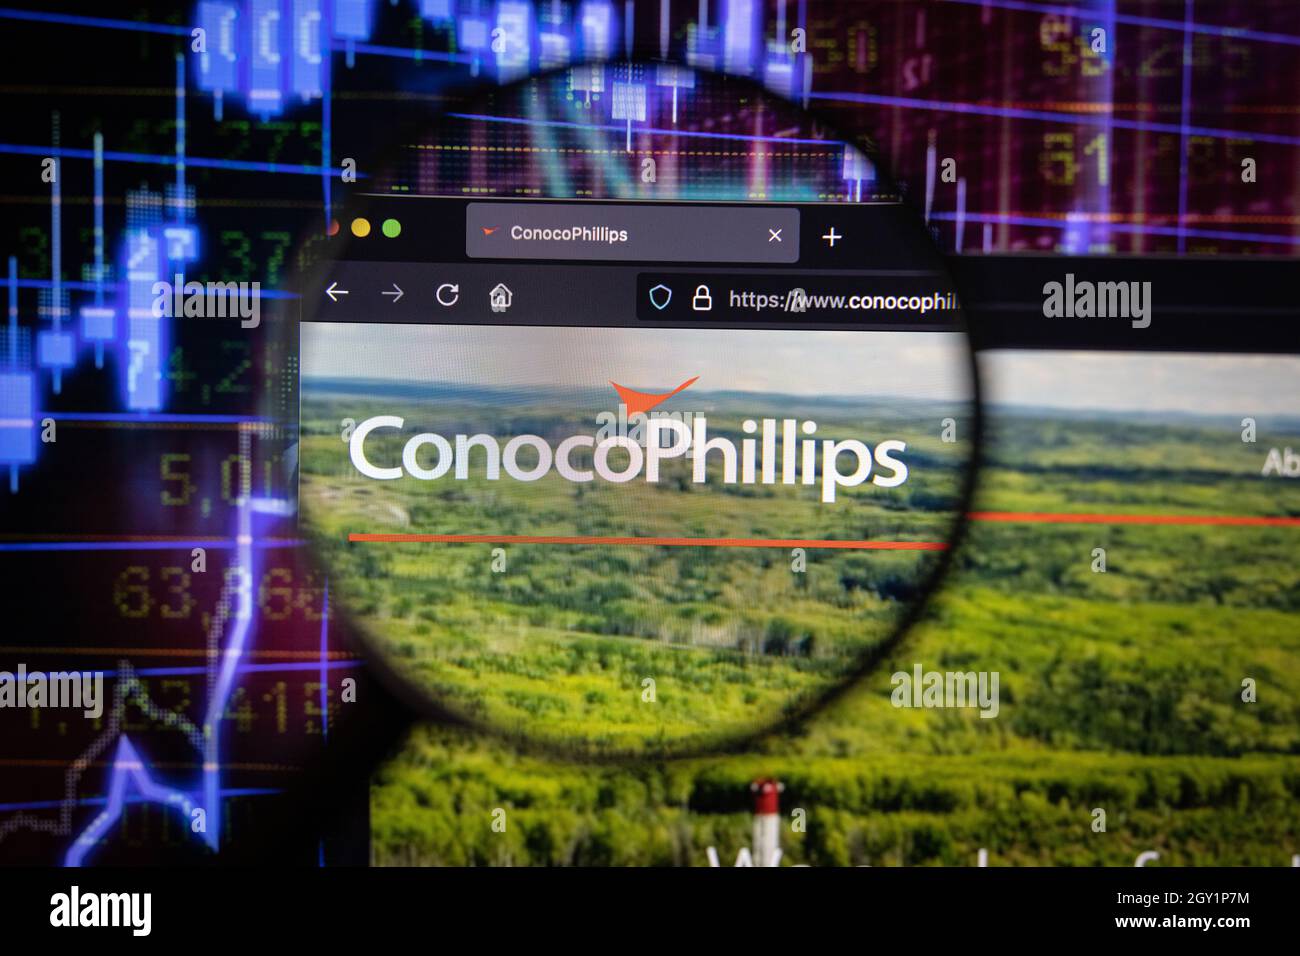 ConocoPhillips company logo on a website with blurry stock market developments in the background, seen on a computer screen through a magnifying glass Stock Photo